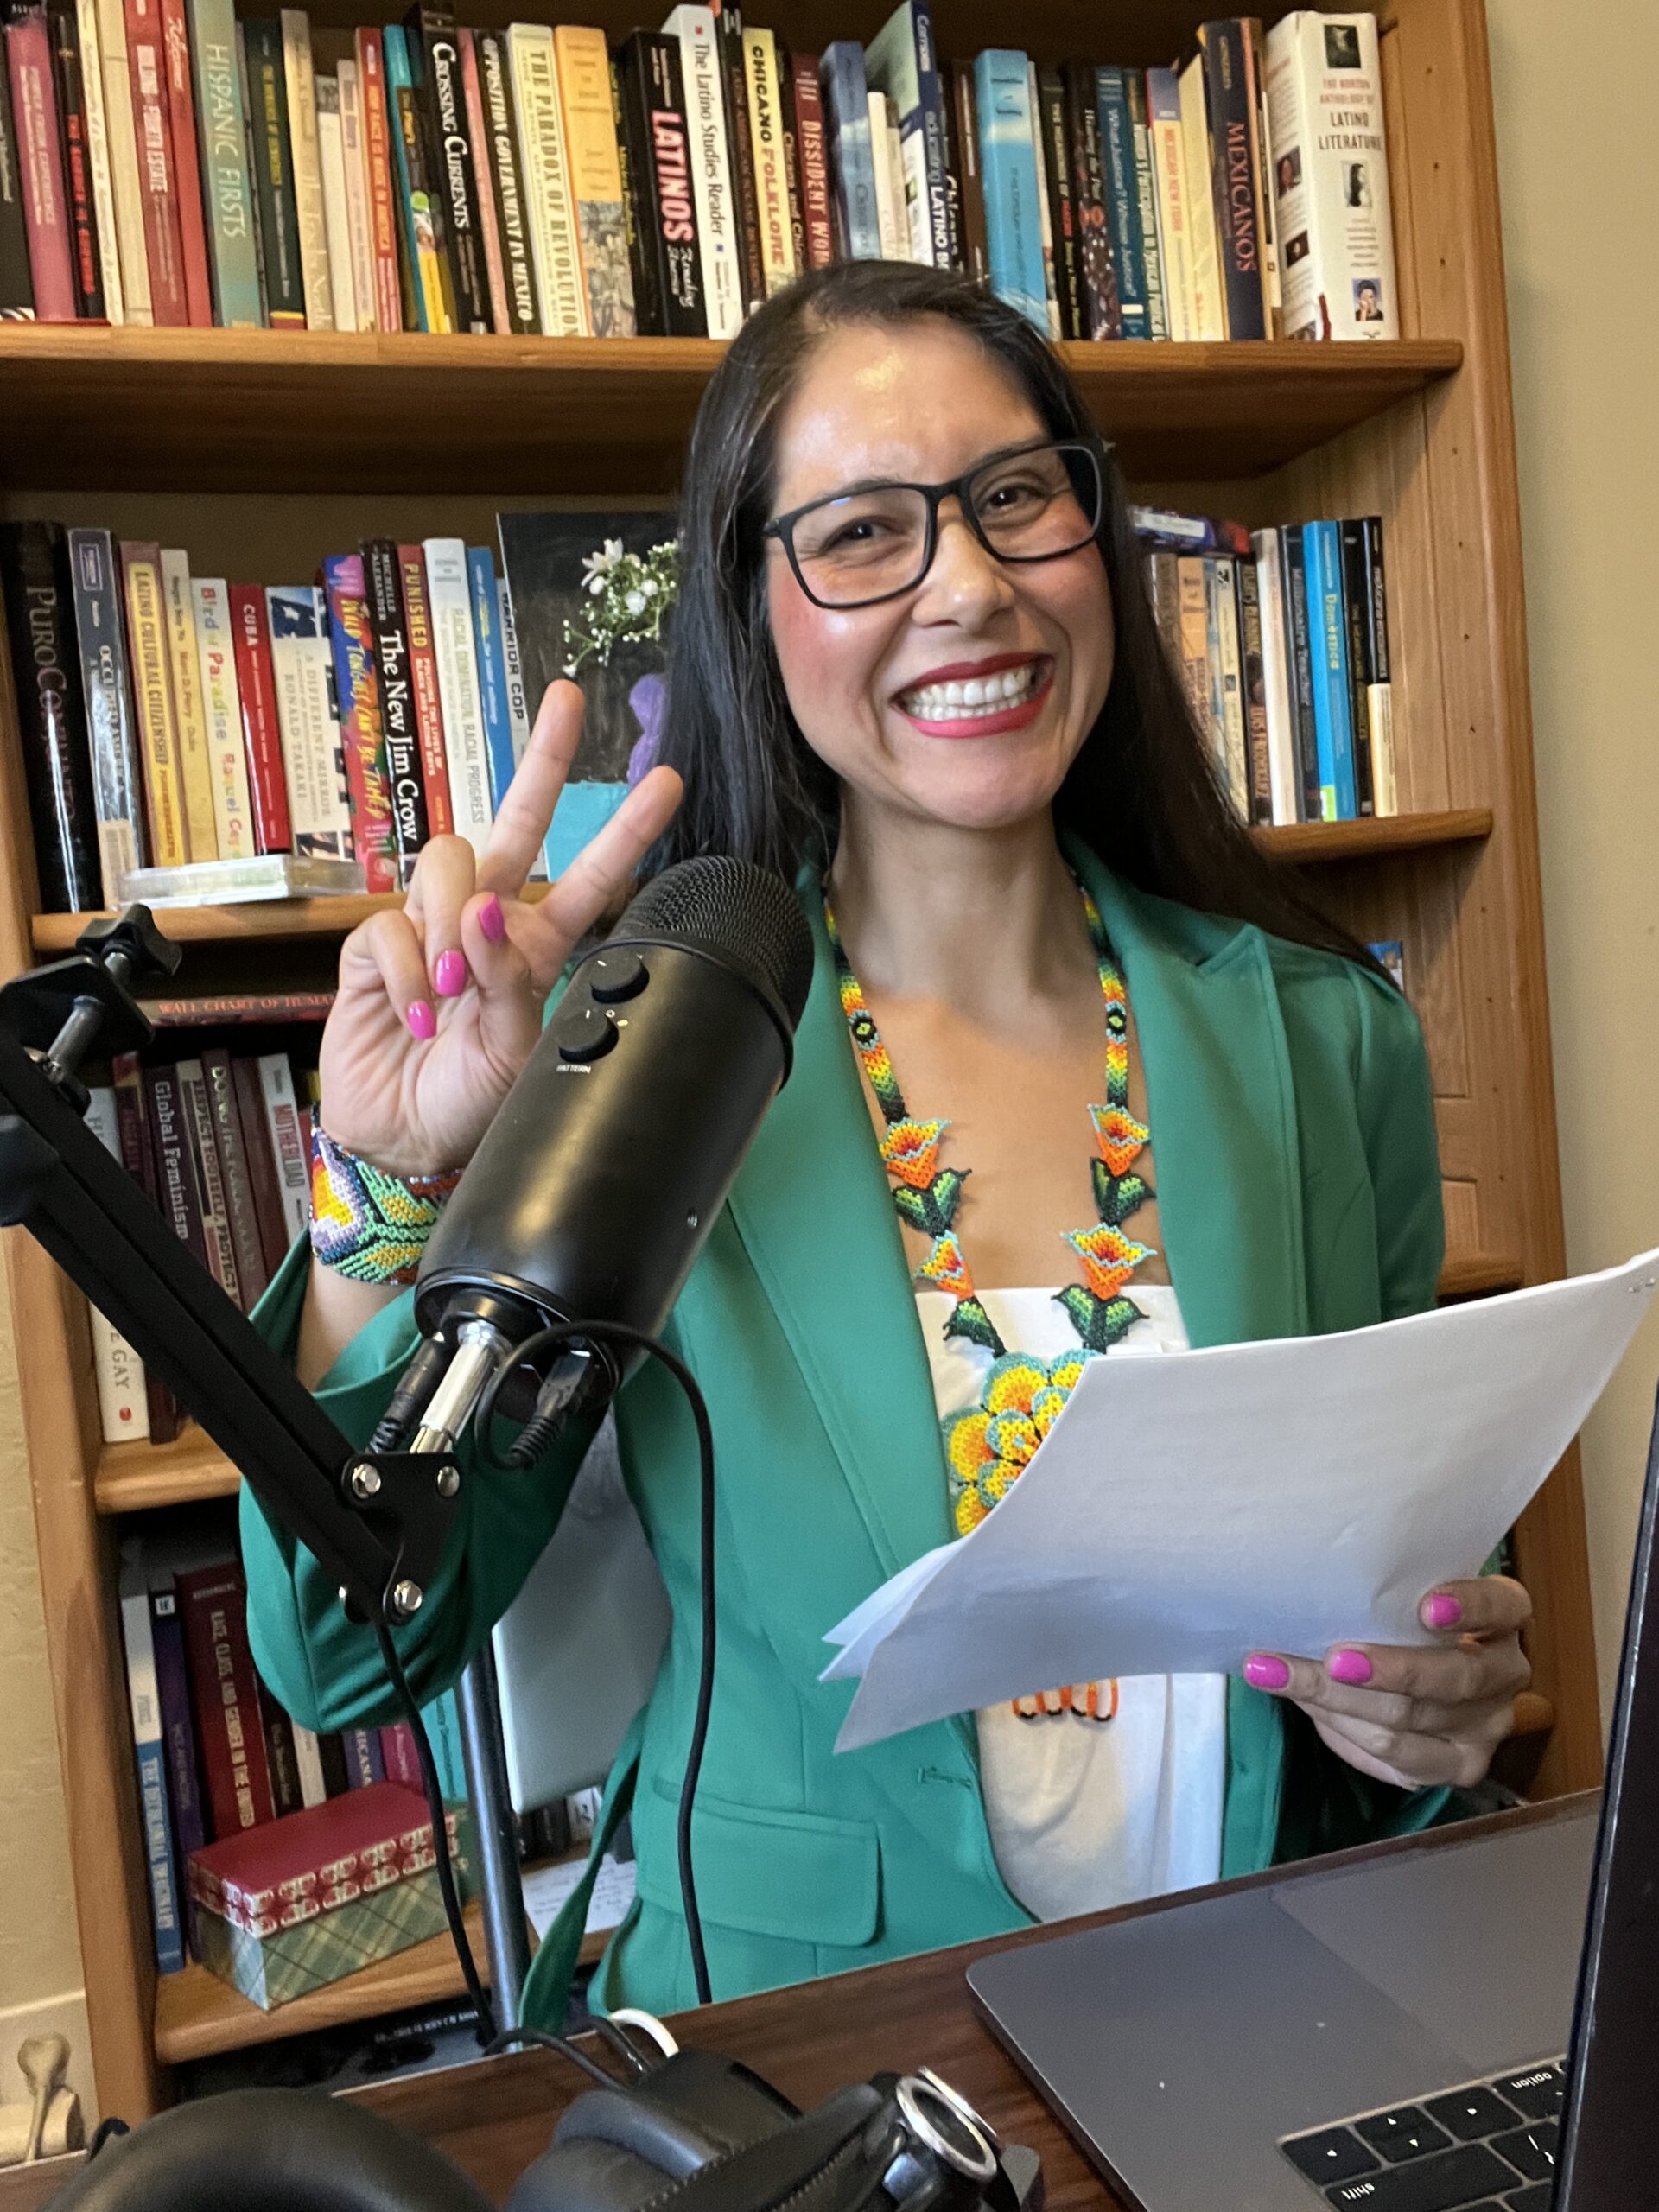 Dr. Hortencia smiling behind a podcast microphone